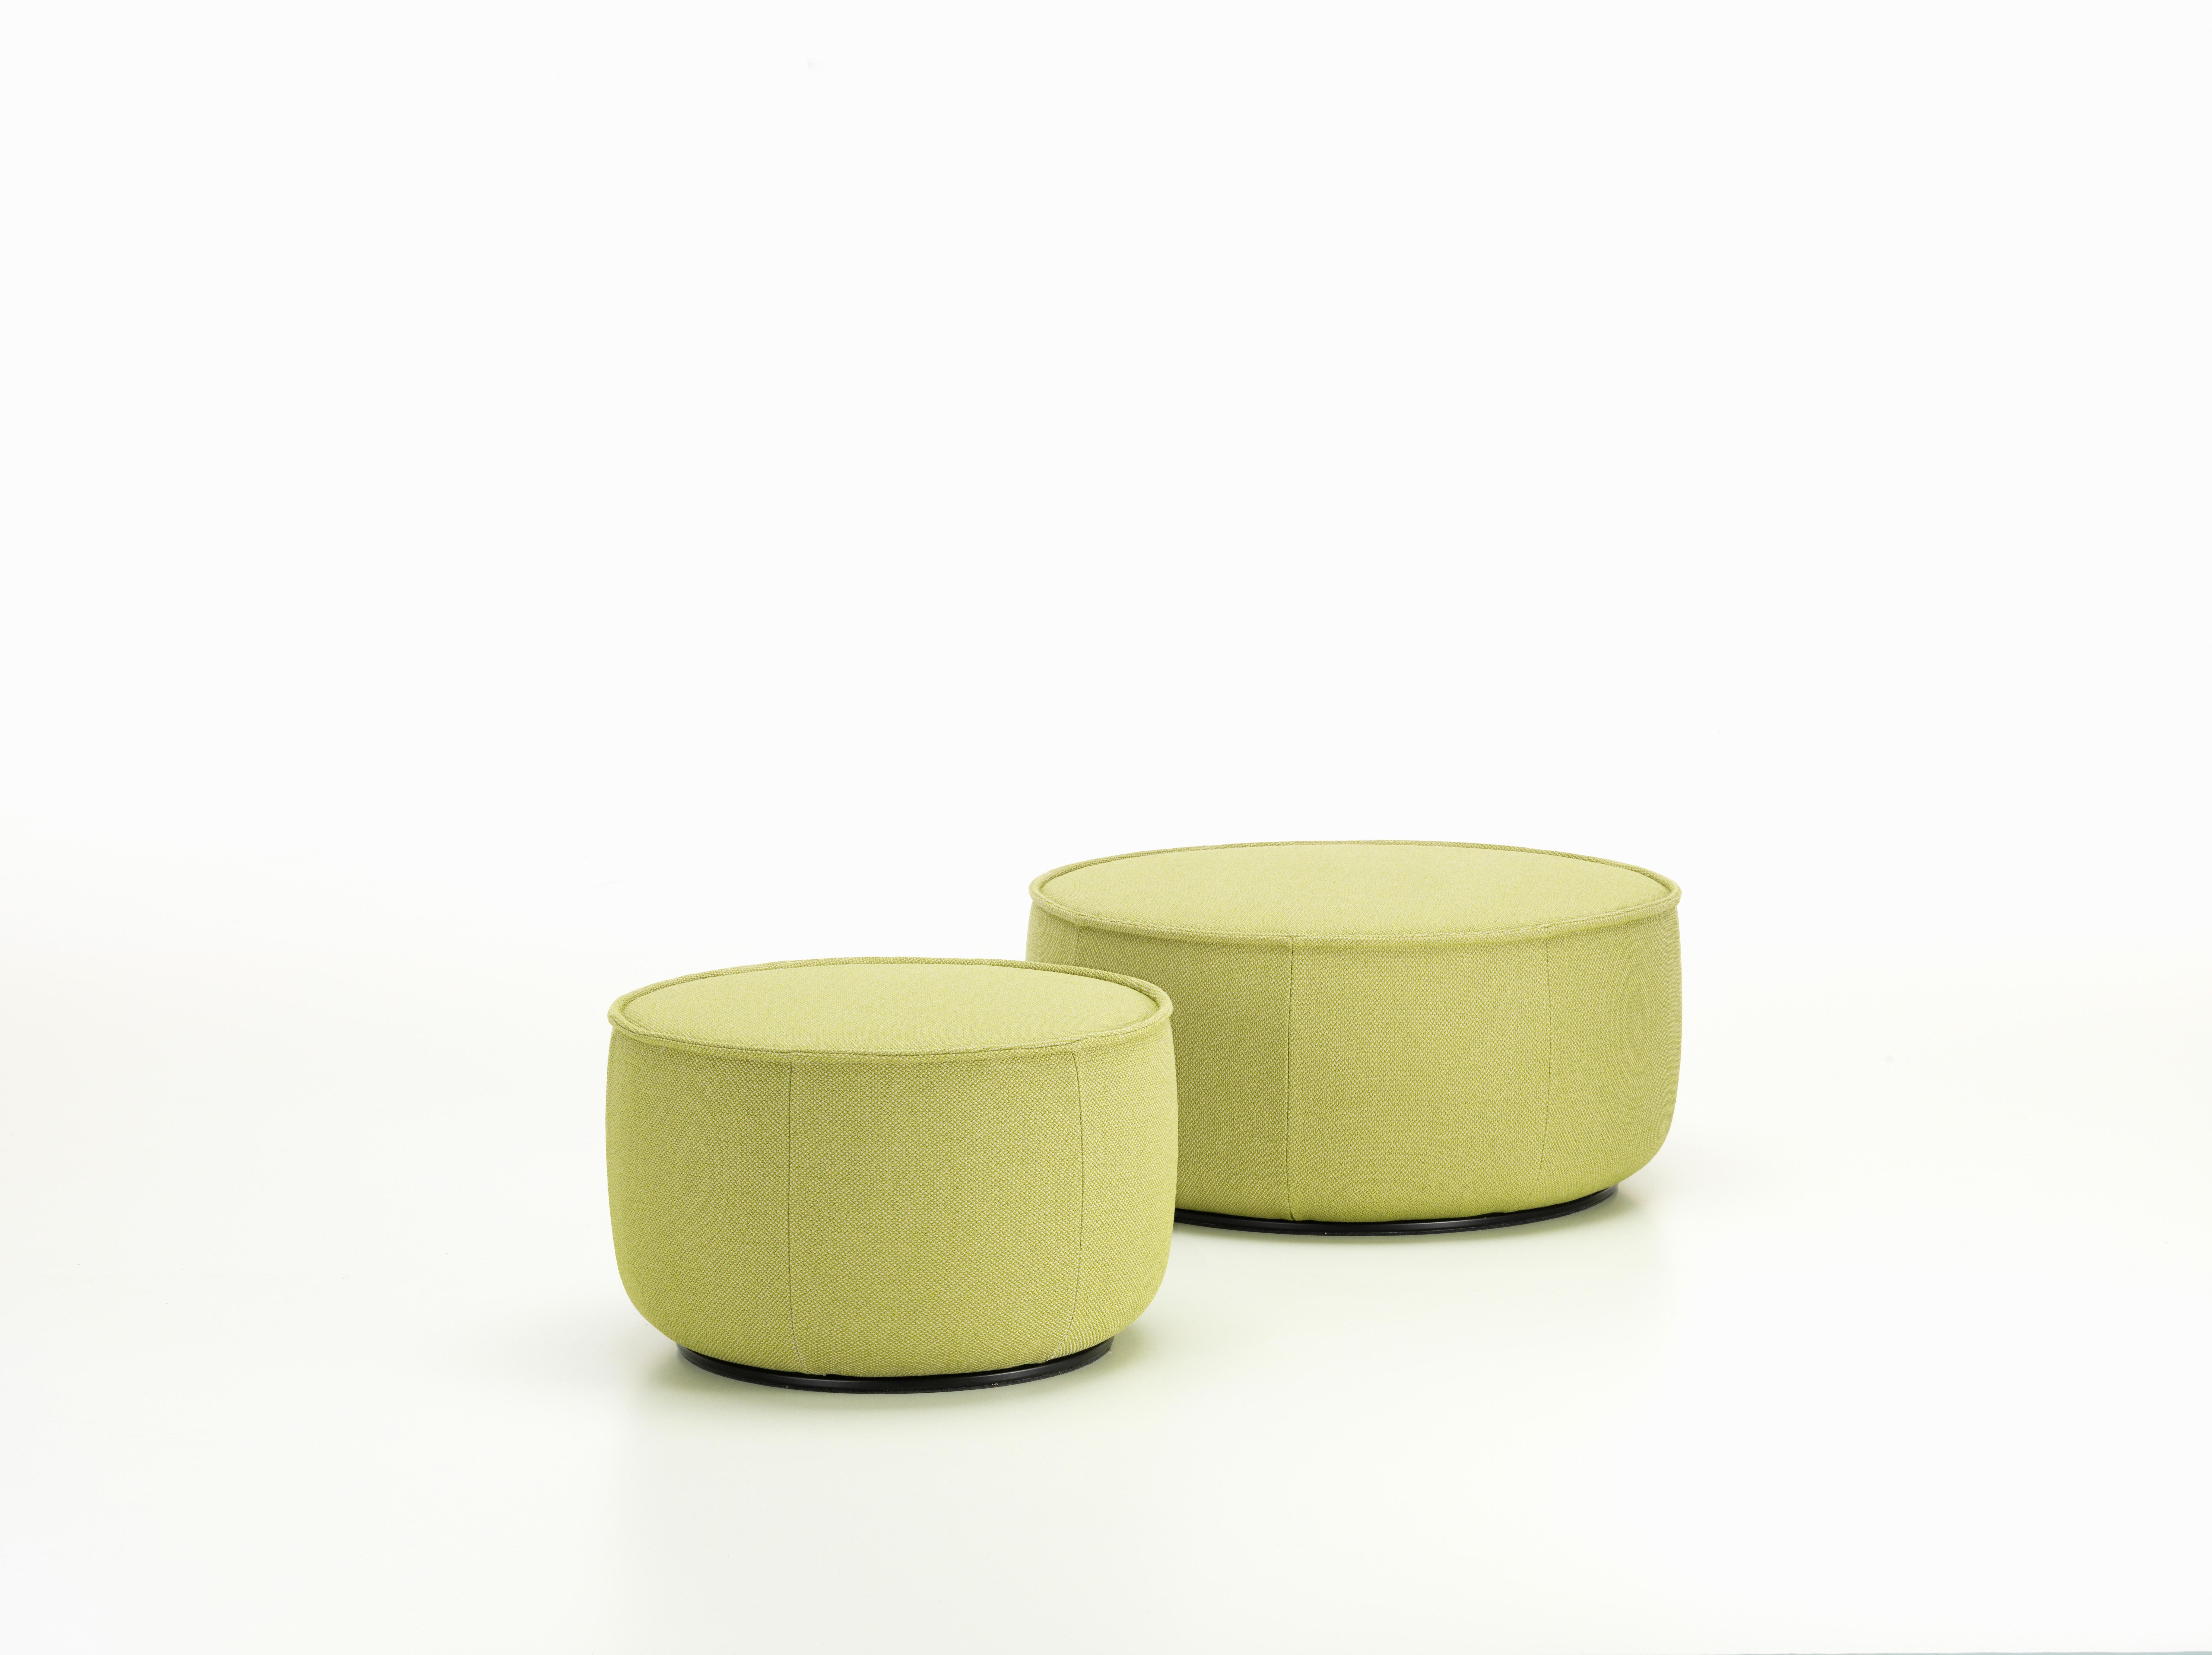 There are two differently sized, round ottomans for combining with the different sized sofa variants of the Mariposa family. They formally match the soft contours of the sofas and create even more possibilities for comfortable sitting.

These items